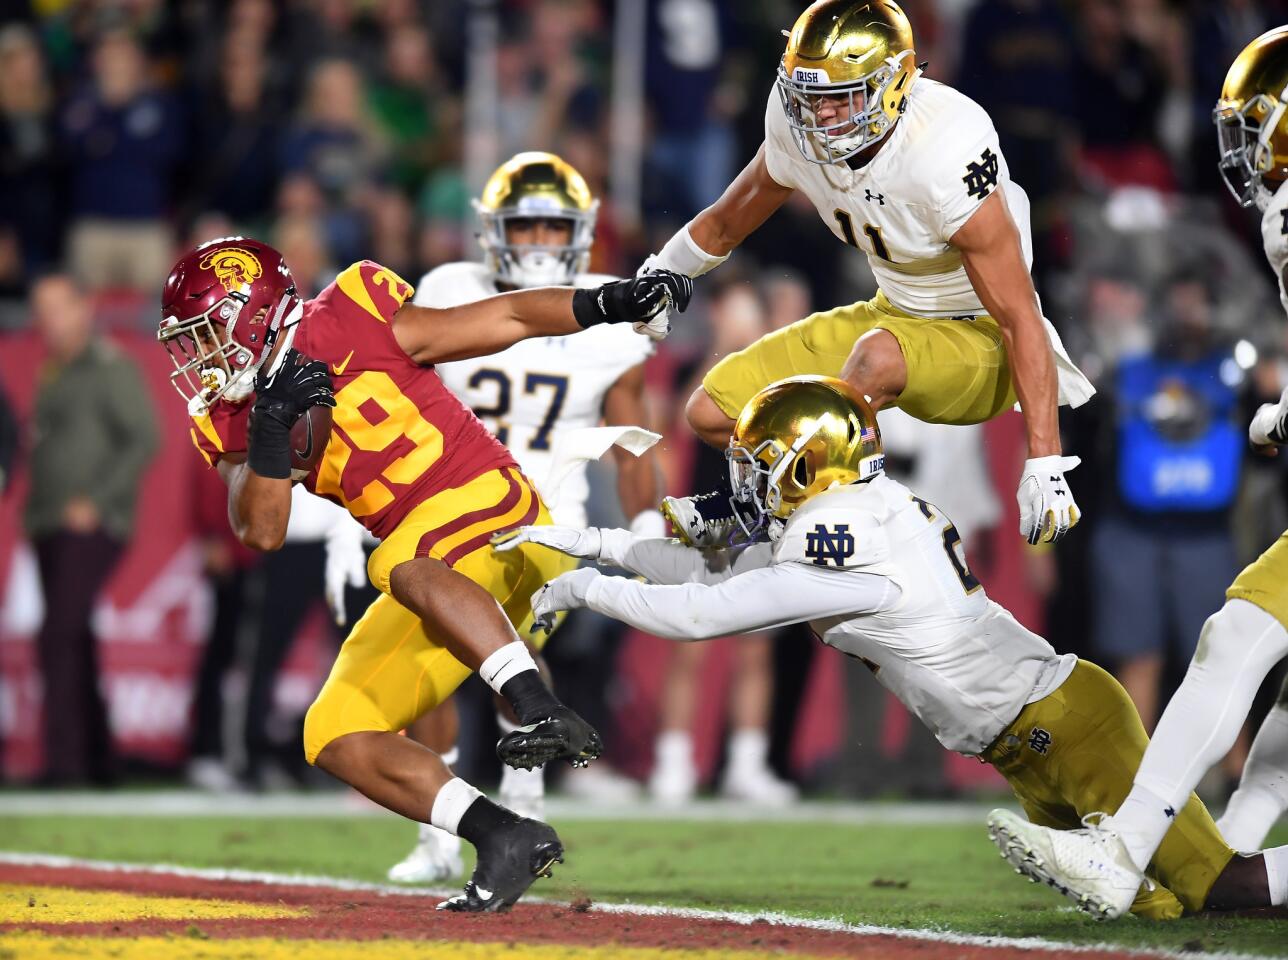 USC running back Vavae Malepeai scores a touchdown against the Notre Dame defense in the first quarter at the Coliseum Saturday.